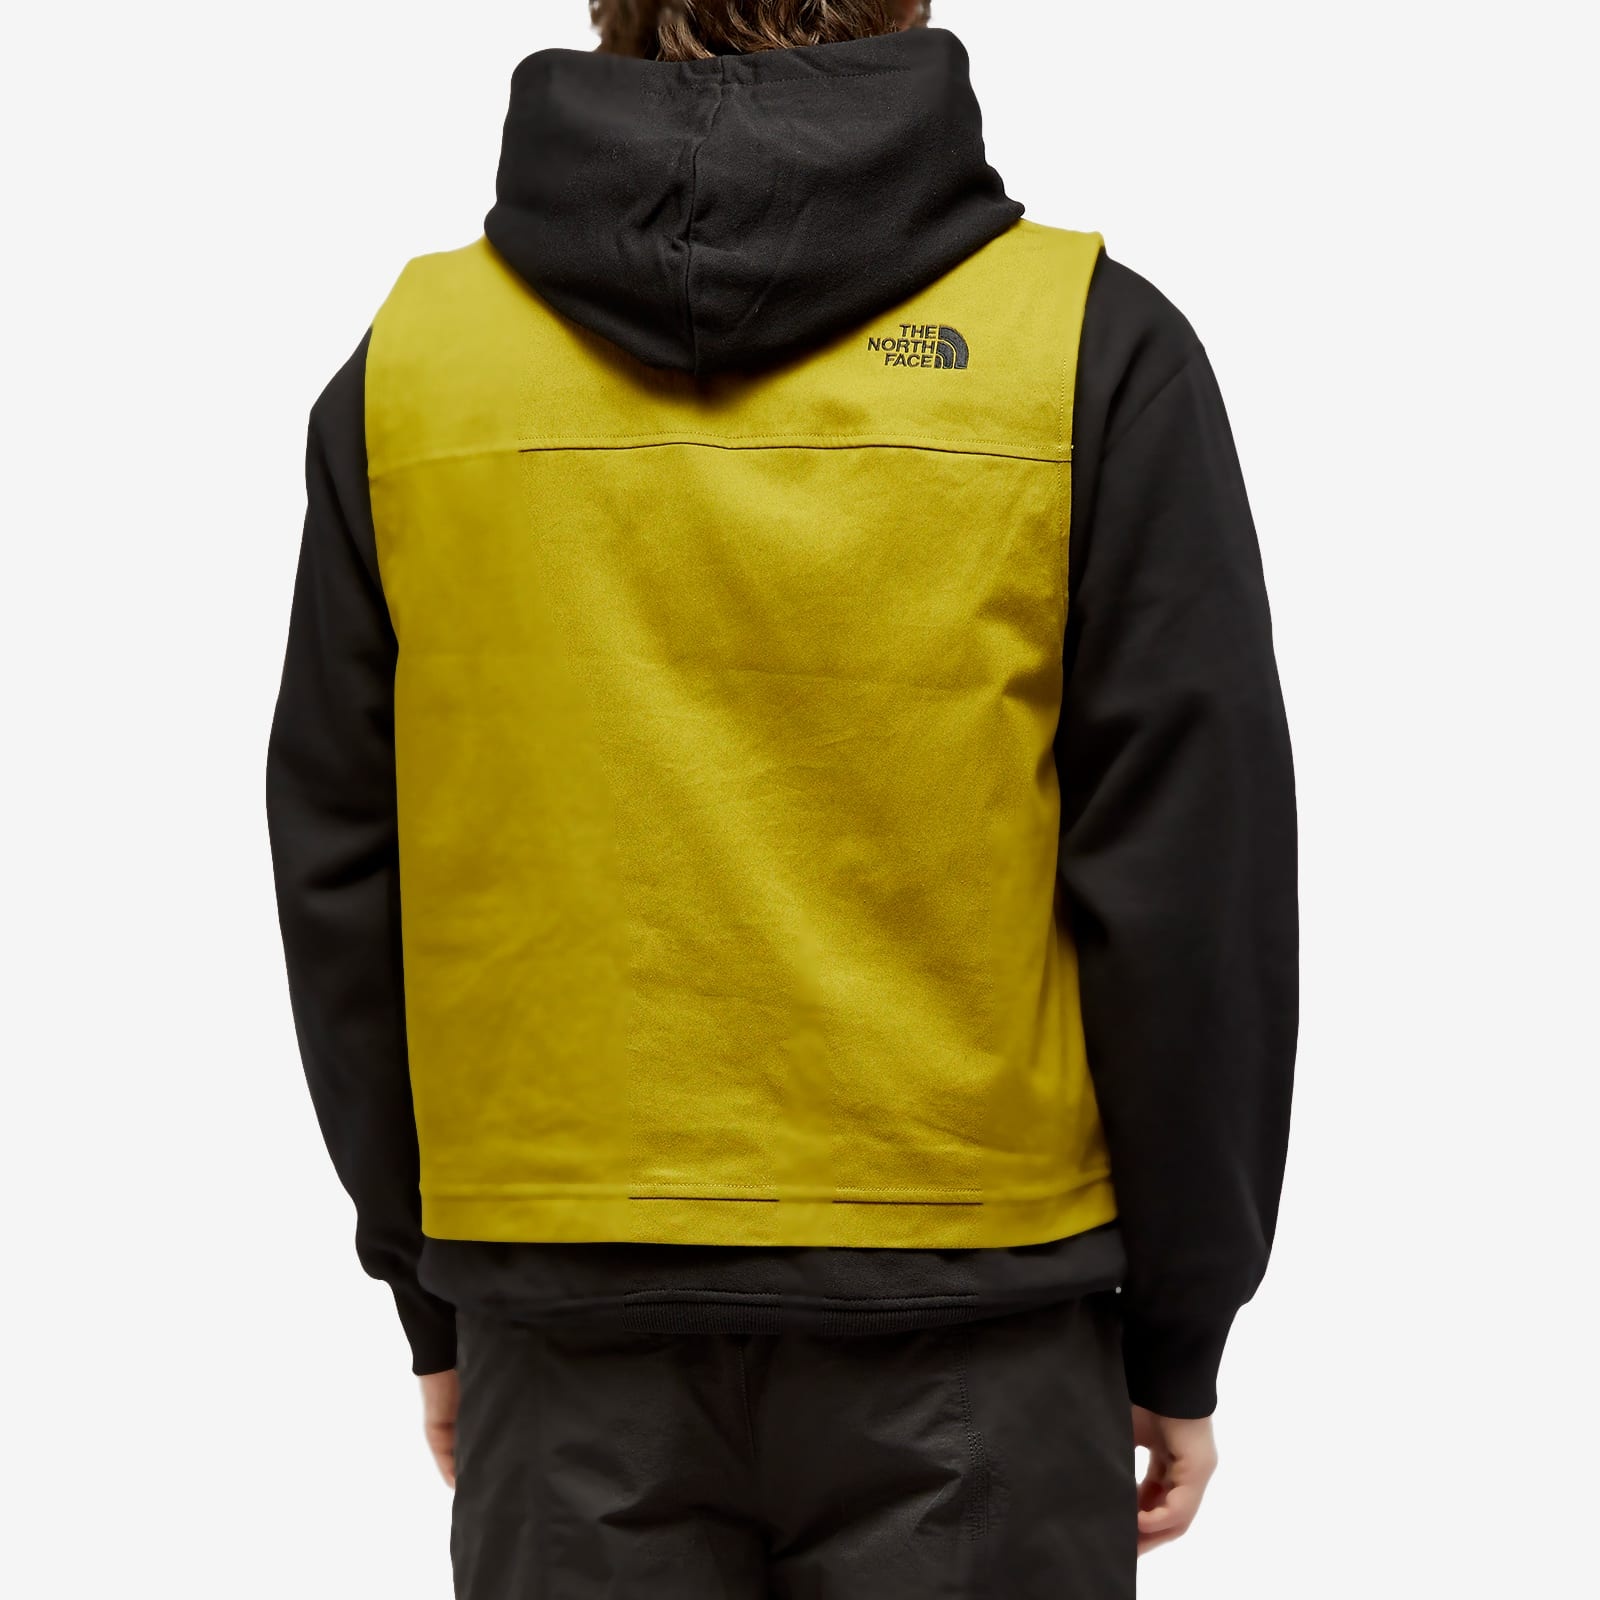 The North Face Heritage Cotton Vest - 3